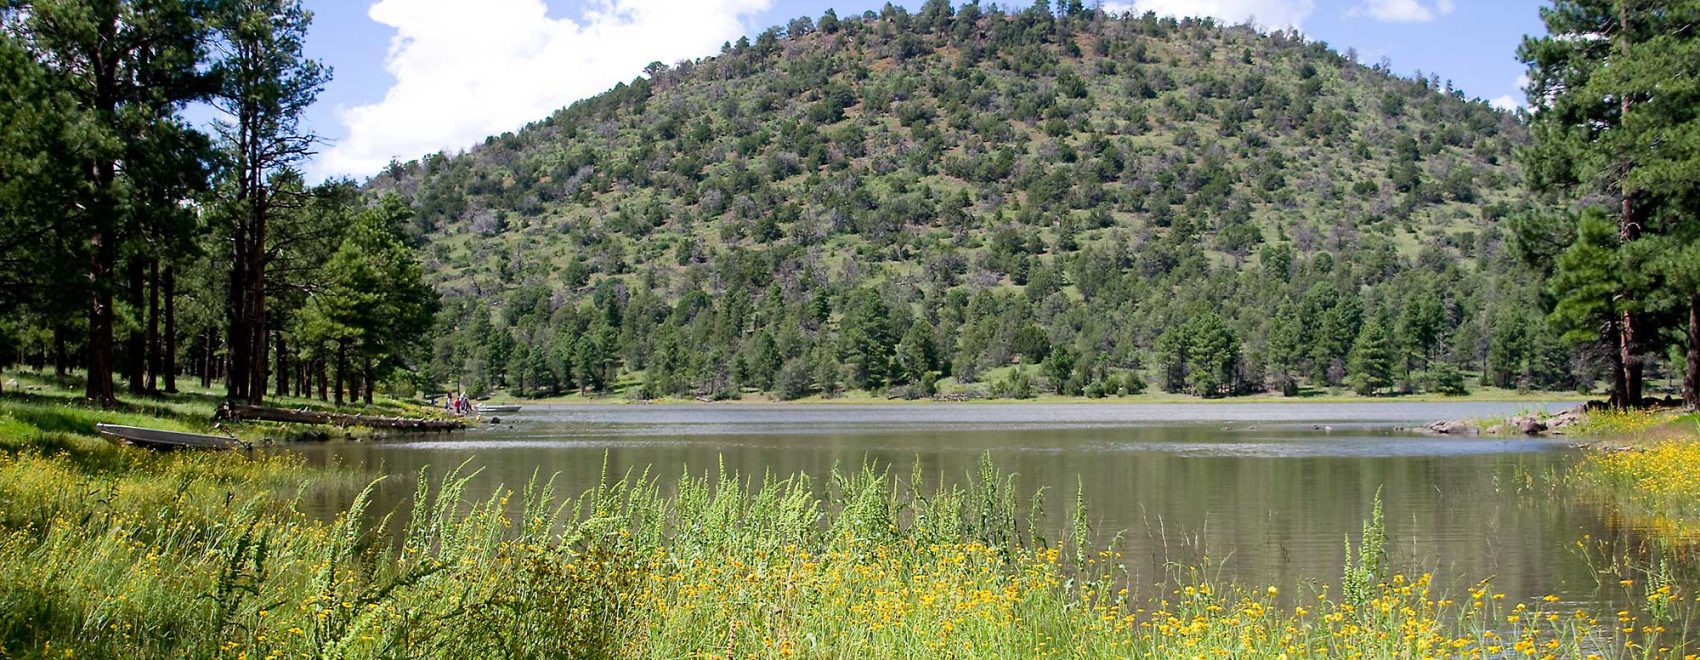 Kaibab Lake Campground in the Kaibab National Forest | Photo Credit: USFS Kaibab Forest